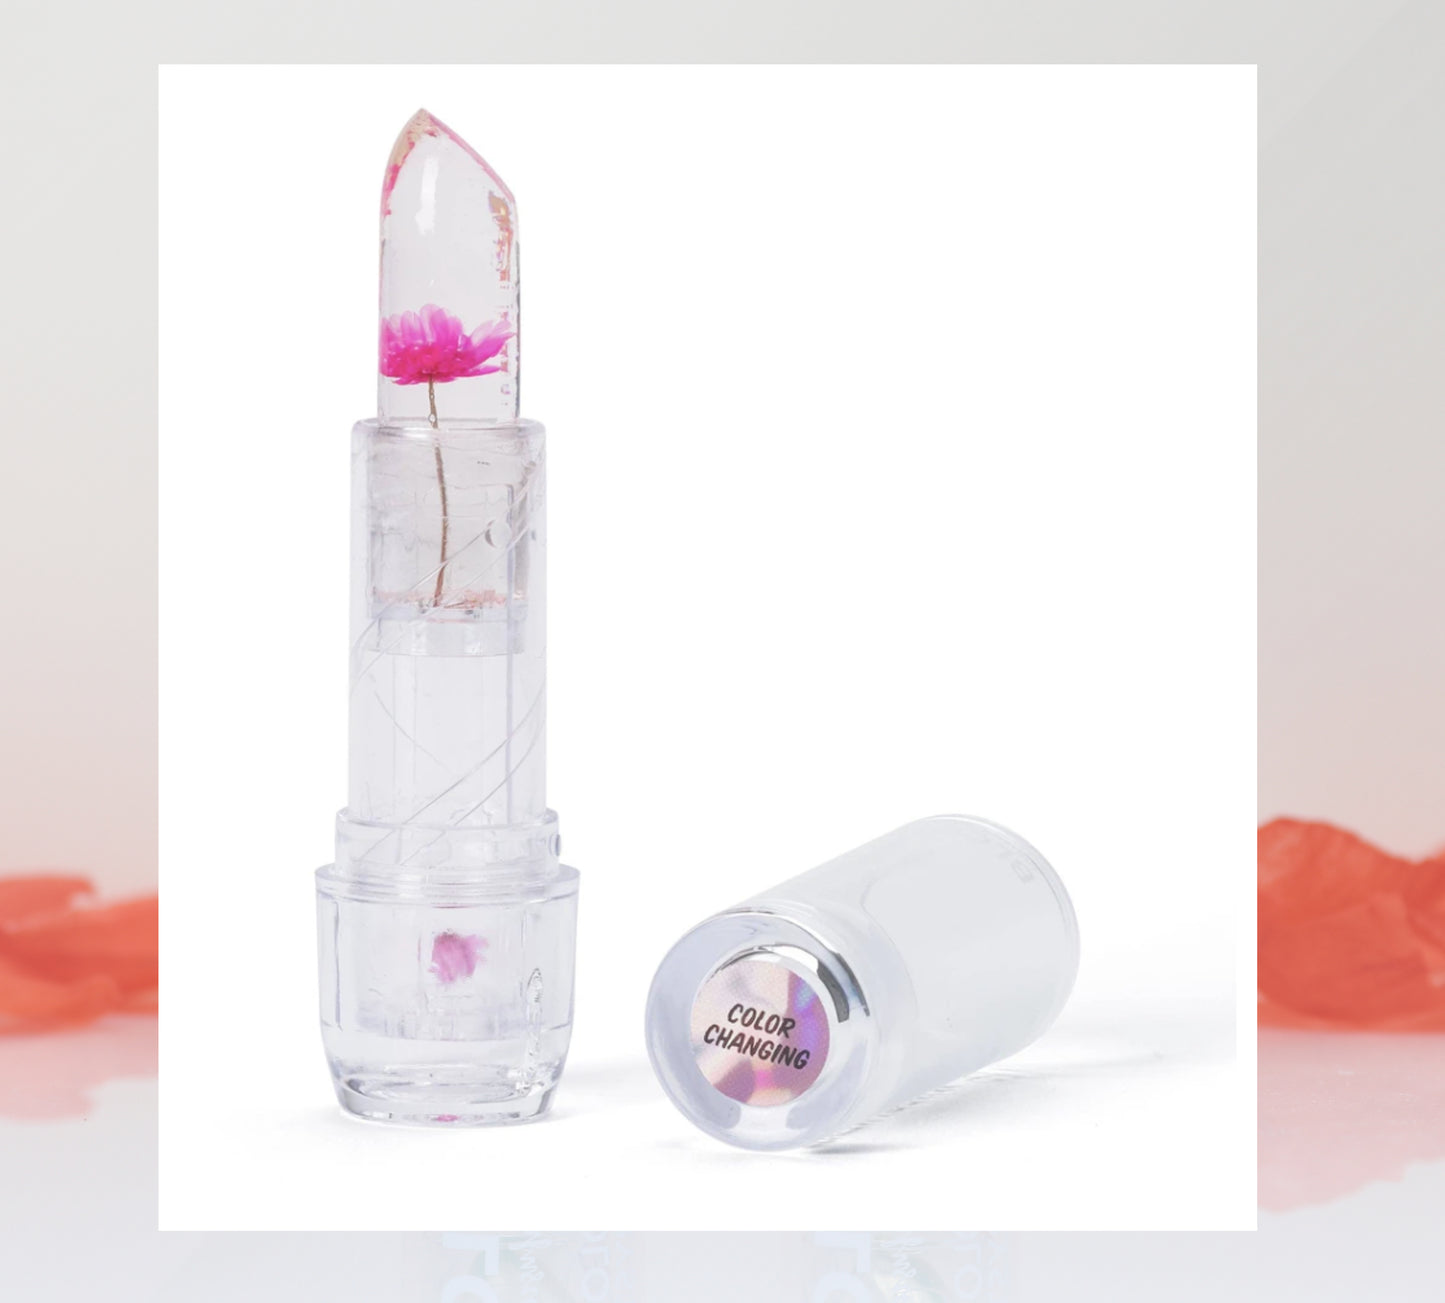 Blossom Color-Changing Crystal Lip Balm Moisturizes Dry Lips Lip Gloss Colors 3g 2 Pc.